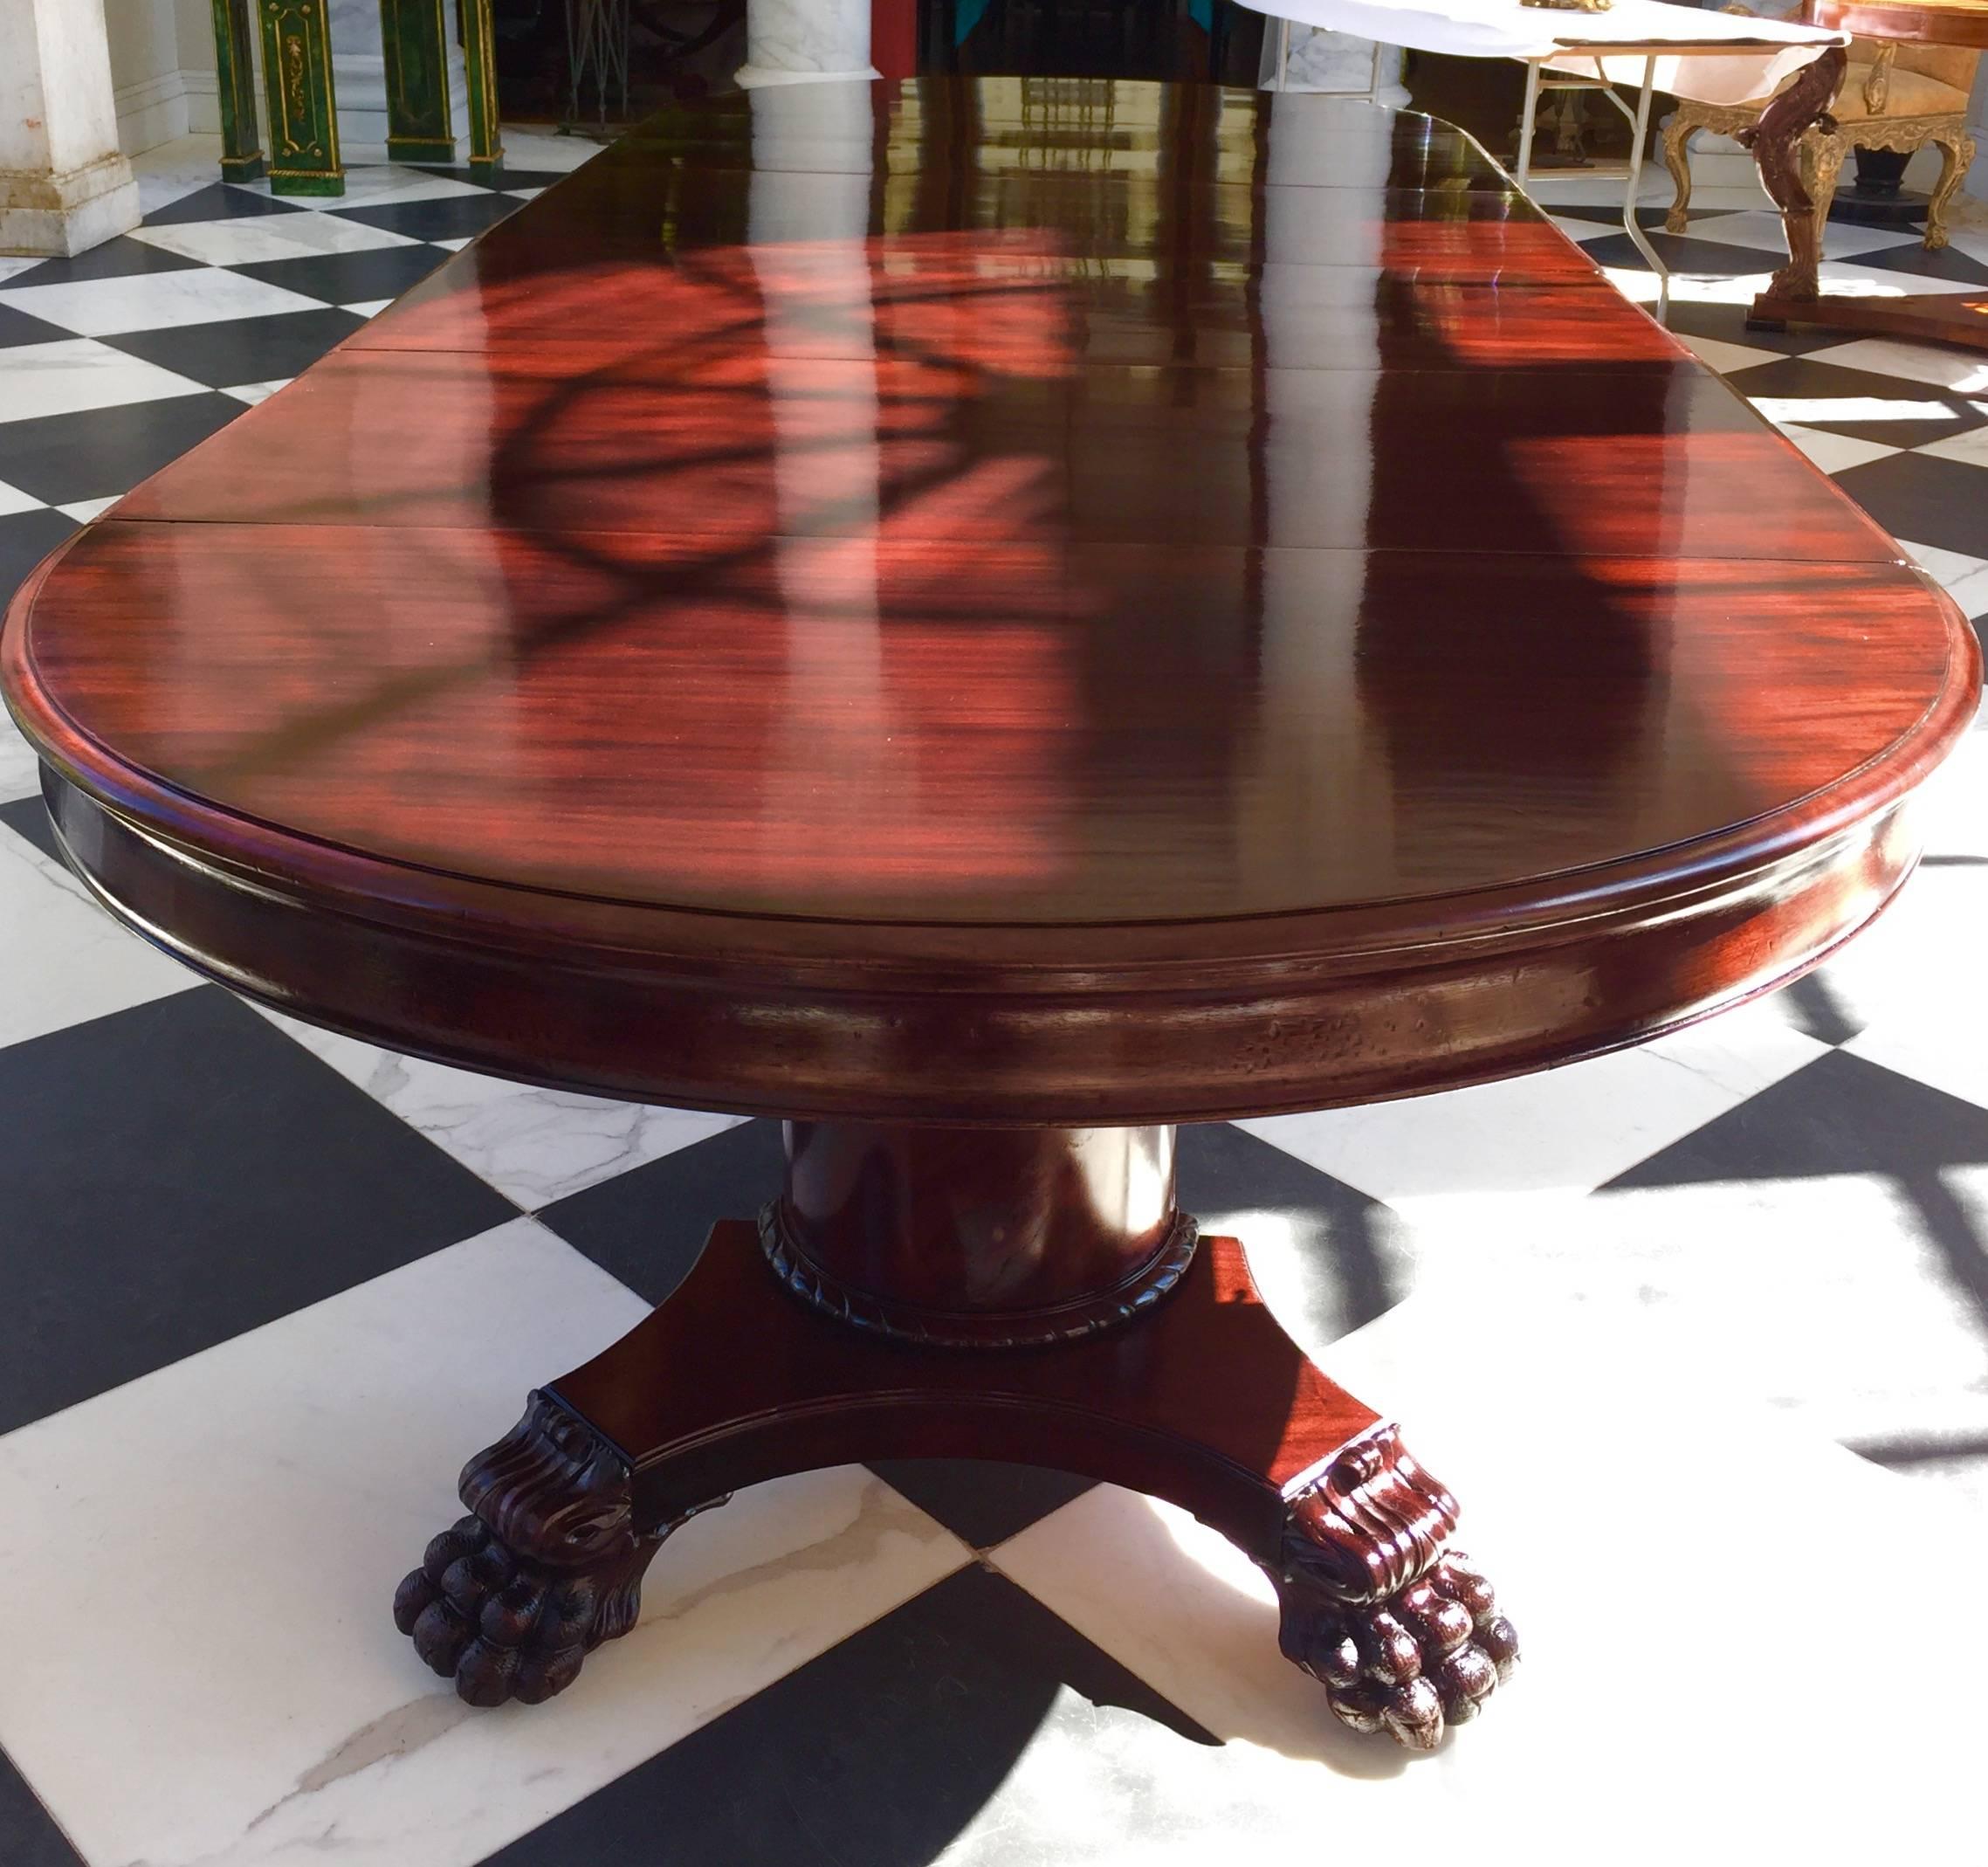 Empire in design this magnificent round split pedestal banquet table will expand with four original 24